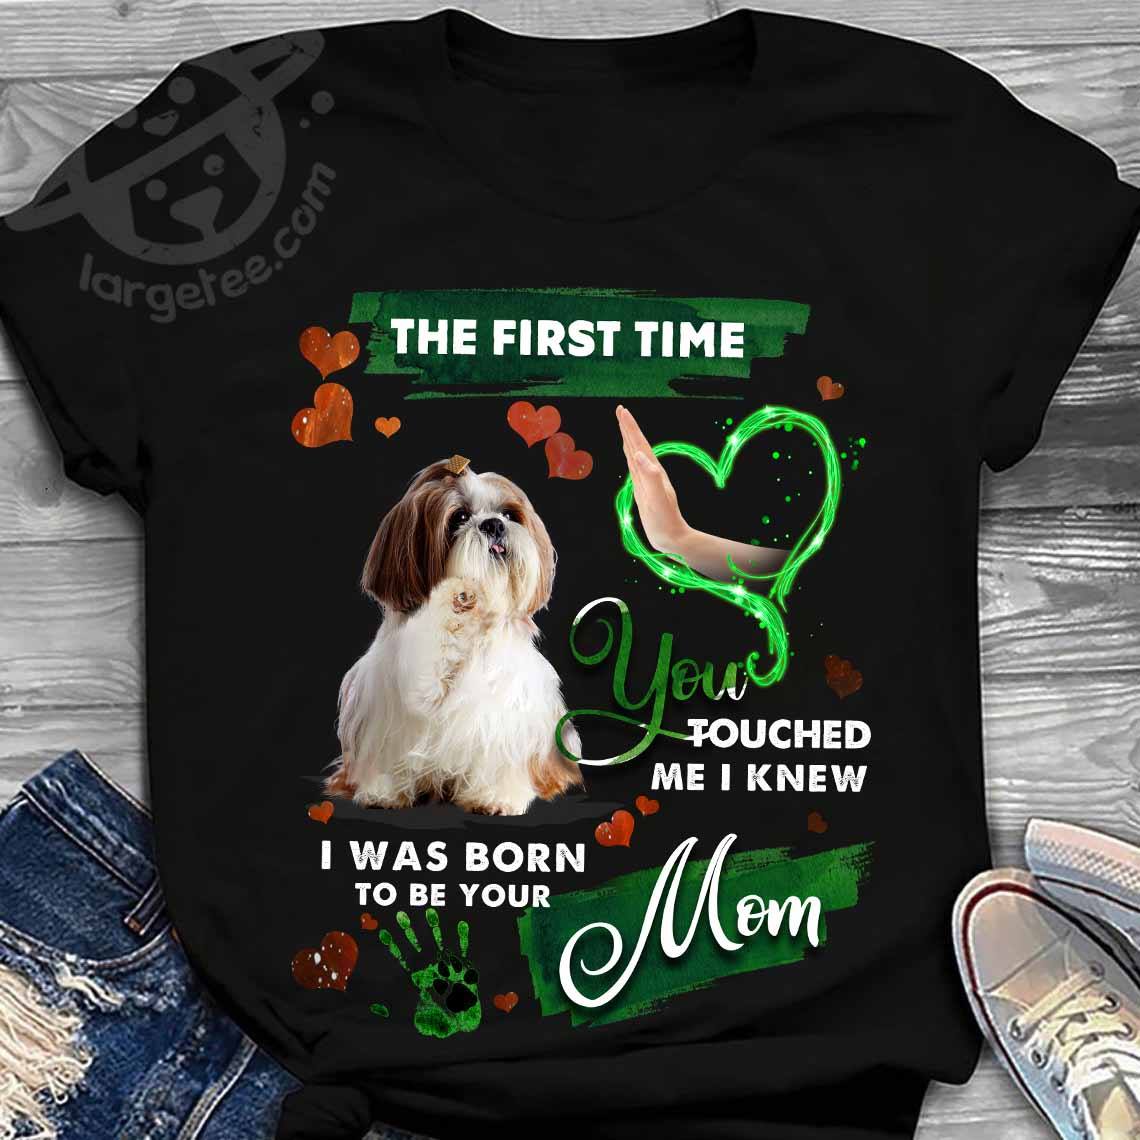 The first time you touched me I knew I was born to be your mom - Shih Tzu dog